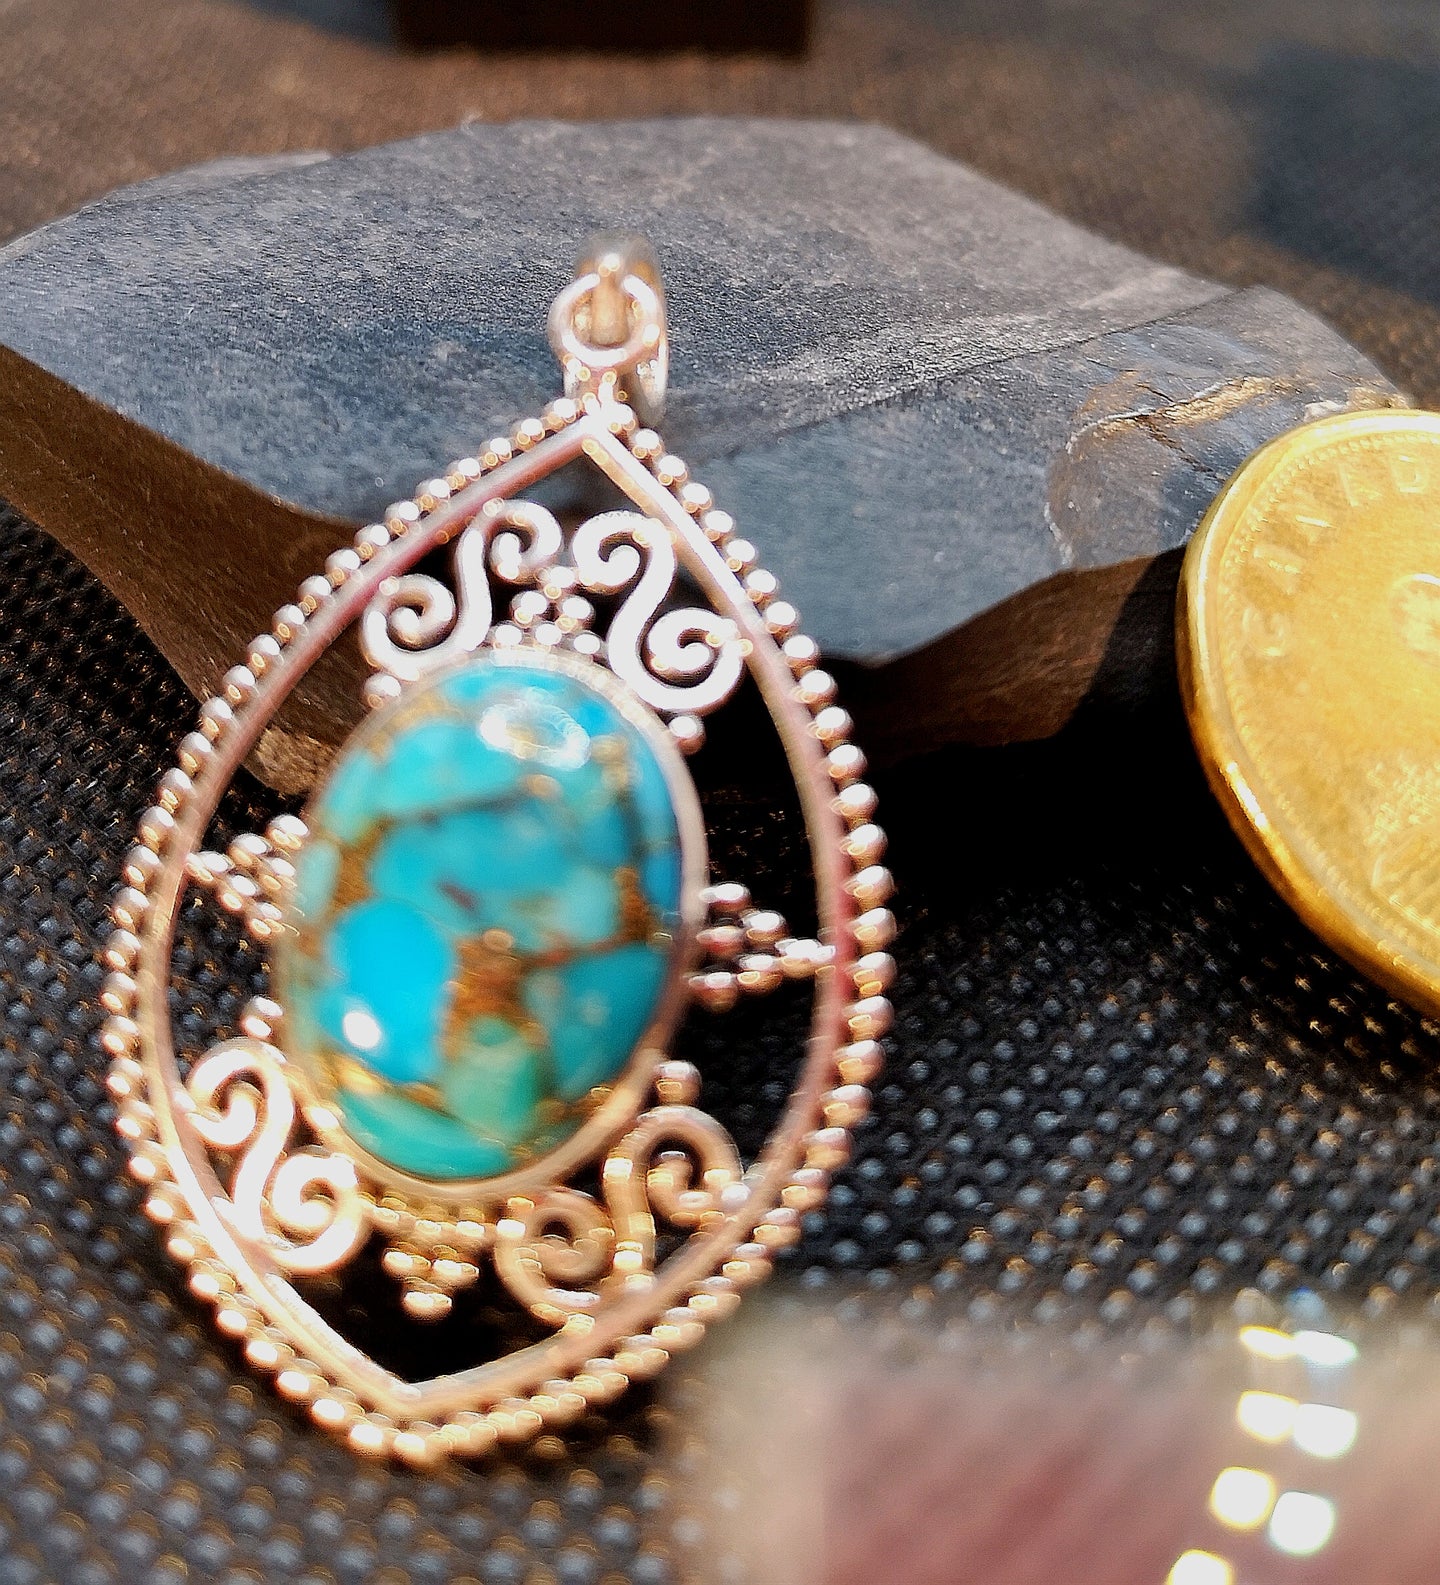 Genuine turquoise pendant in sterling silver